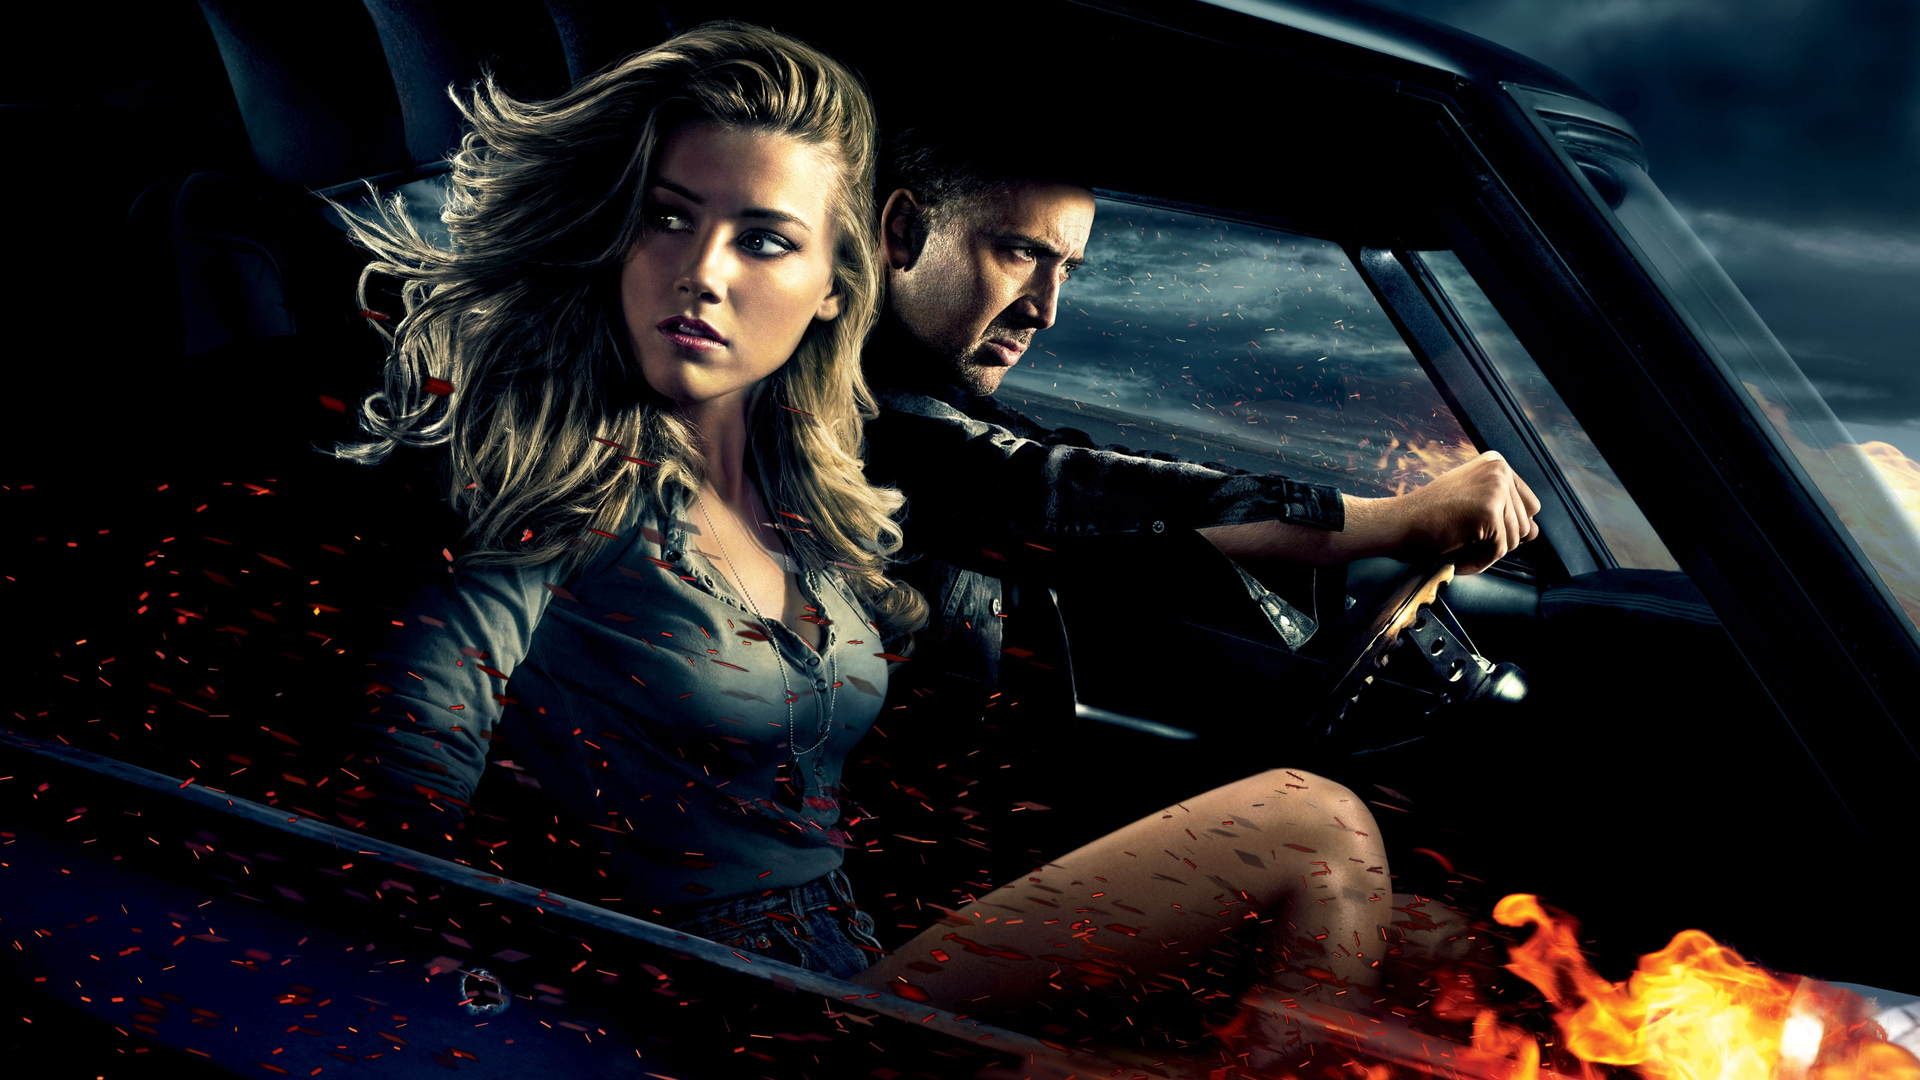 Drive Angry HD Wallpaper Background Image